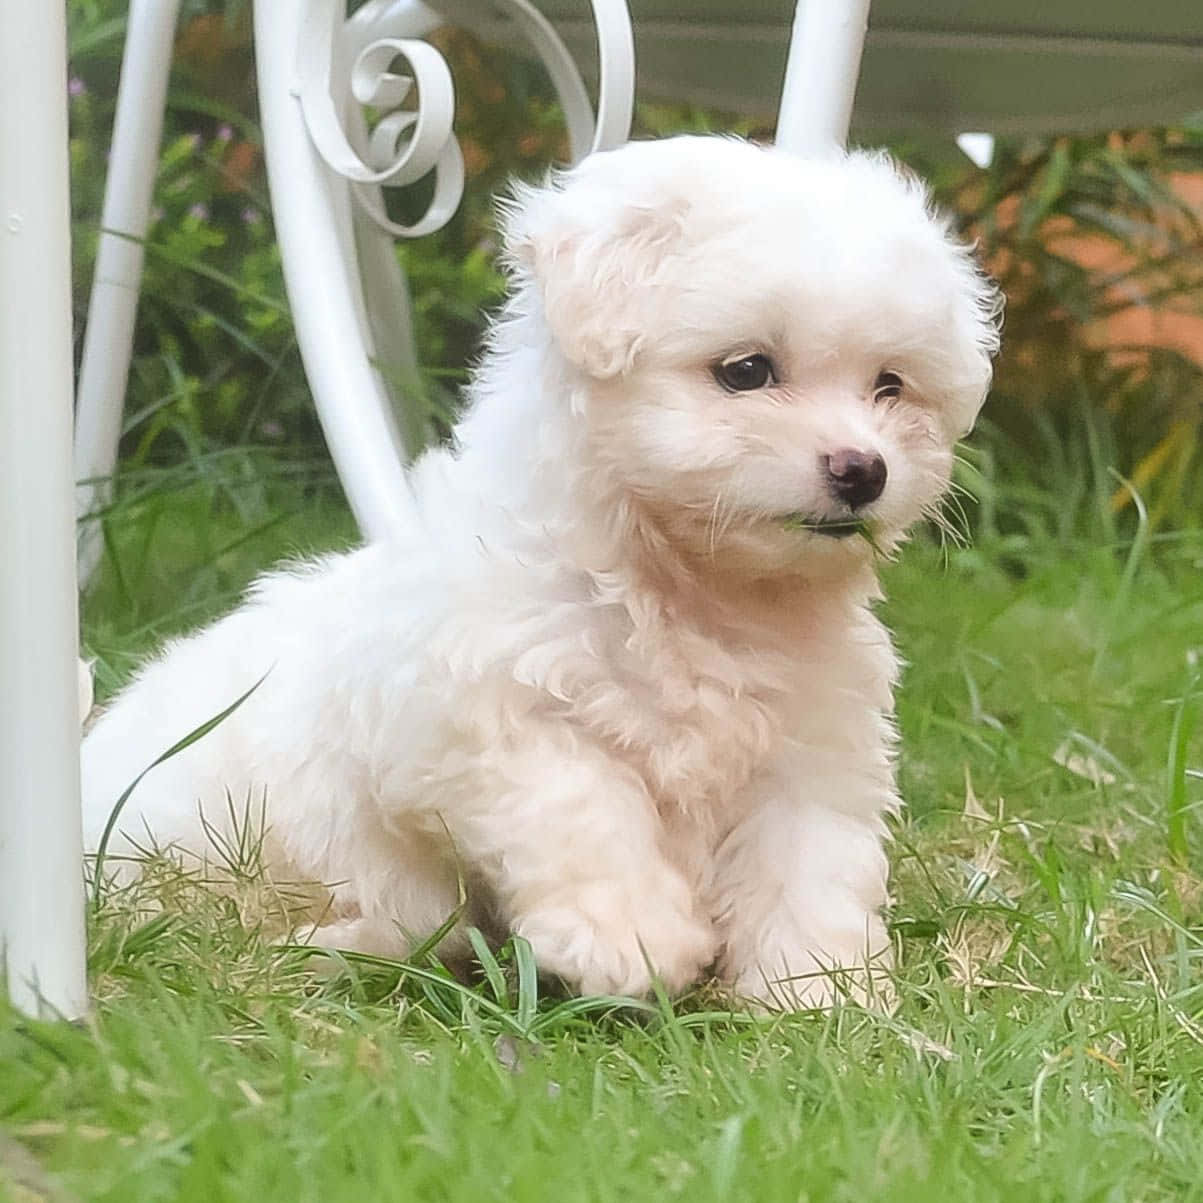 A White Puppy Sitting On The Grass